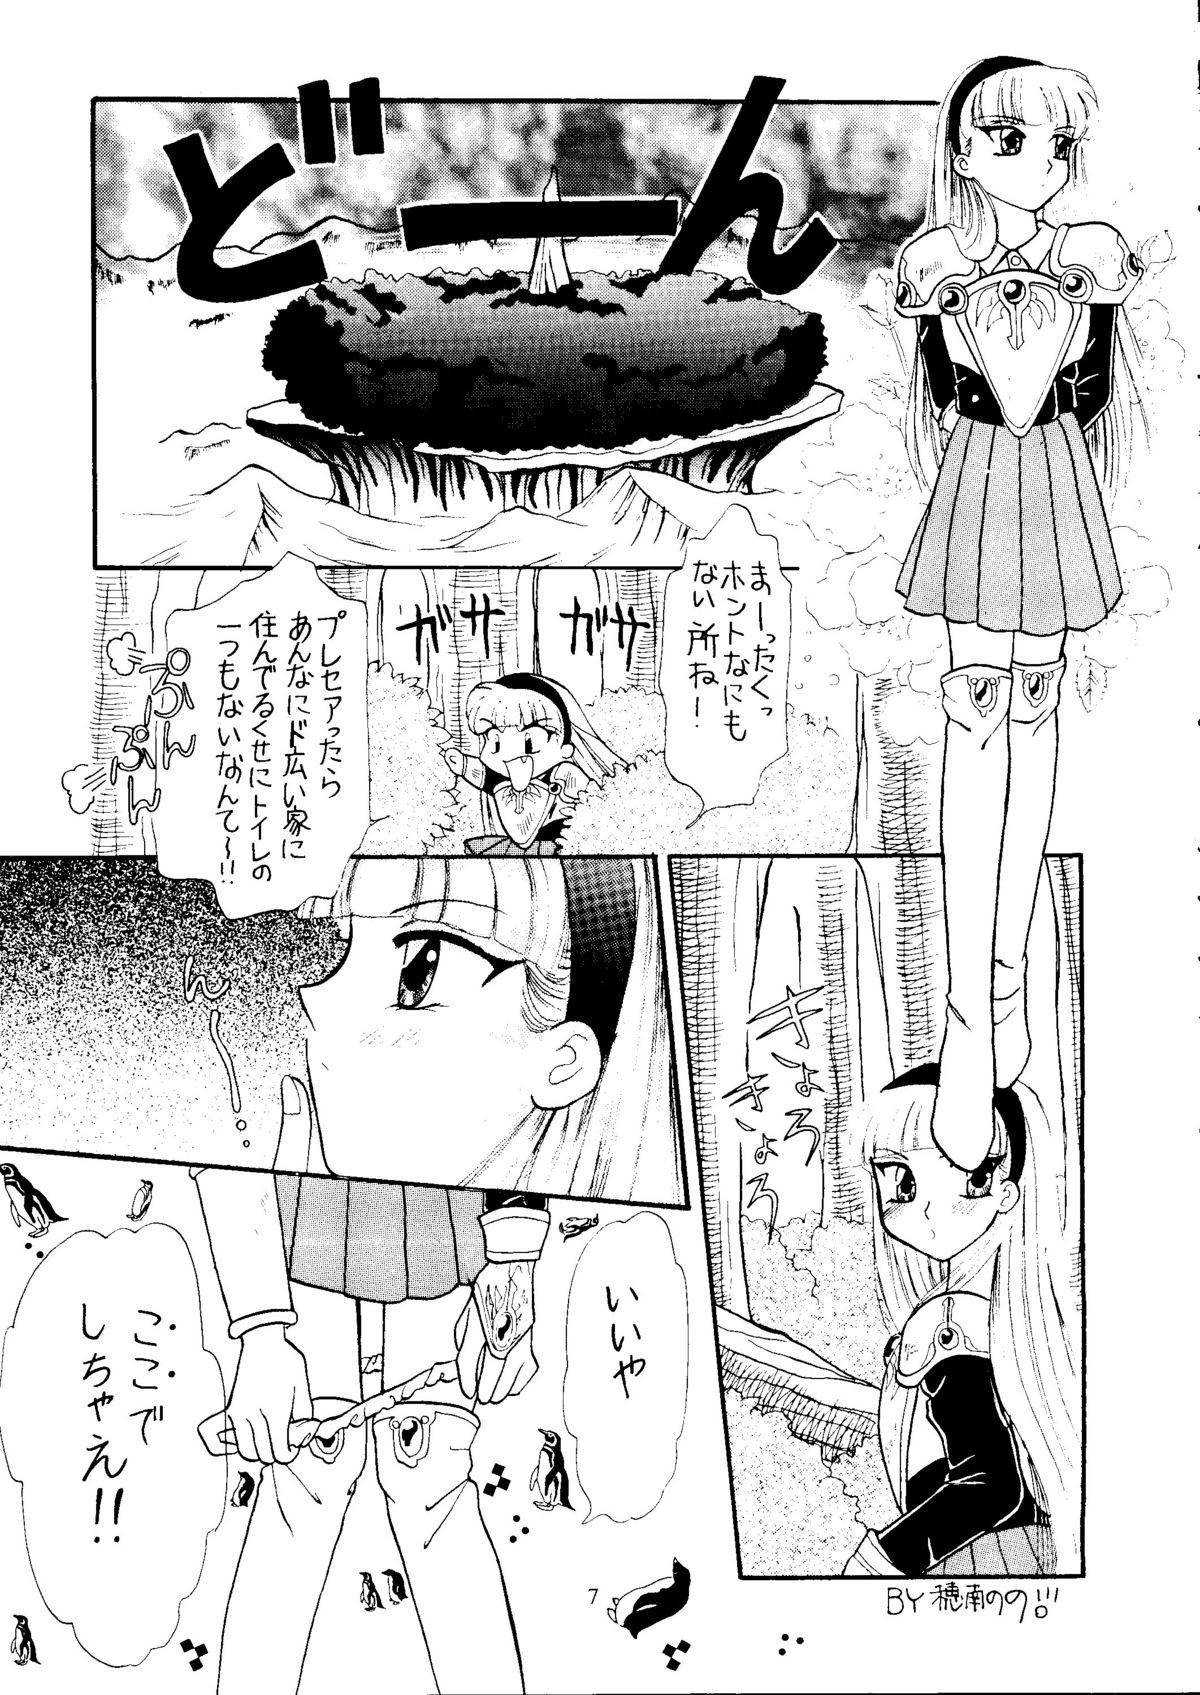 4some Motel - Magic knight rayearth Young Tits - Page 4